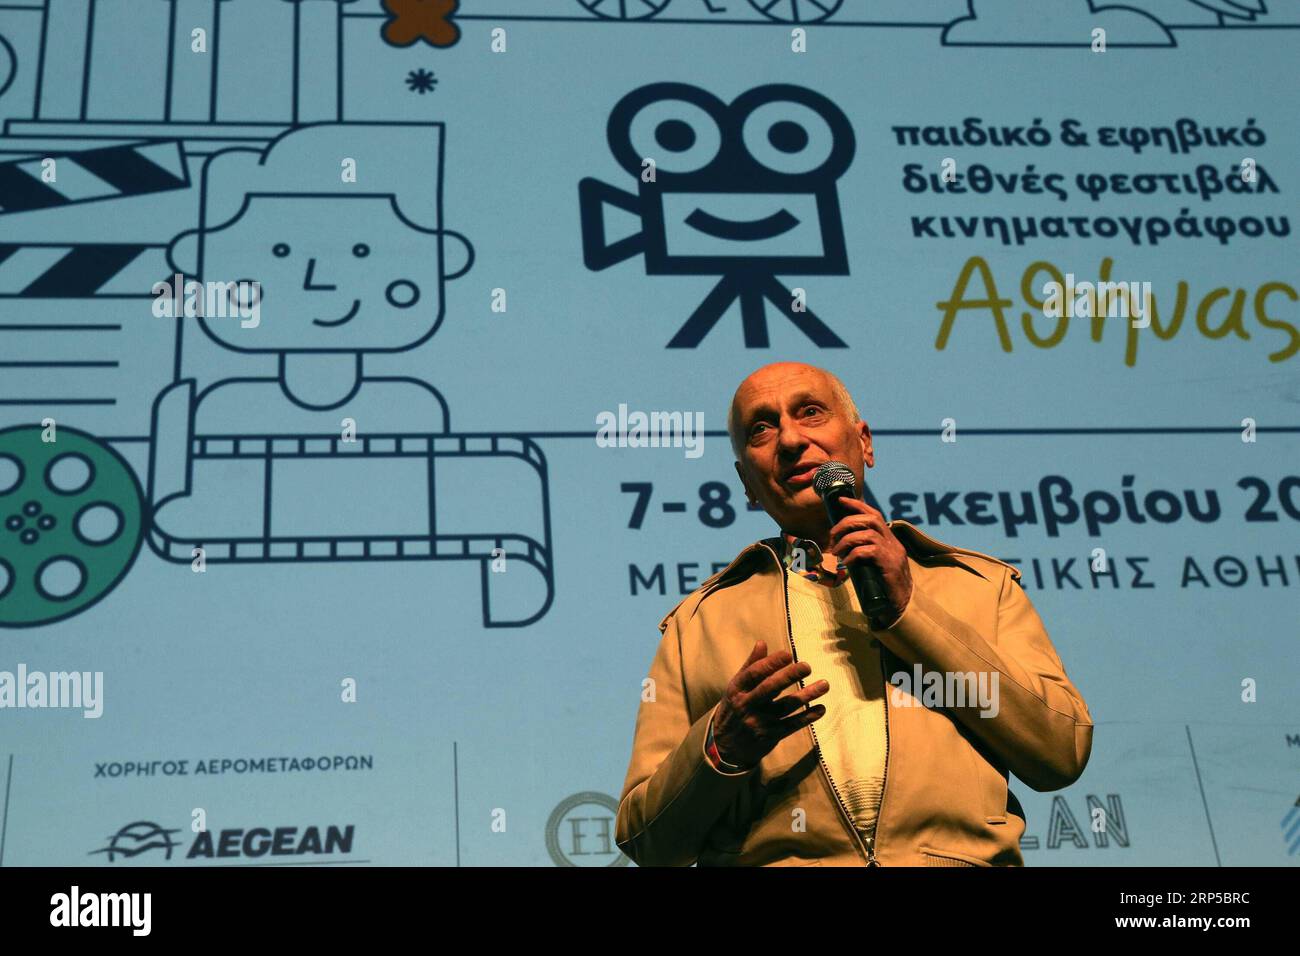 (181207) -- ATHENS, Dec. 7, 2018 -- French director Michel Ocelot speaks at the opening of the Athens International Children s Film Festival in Athens, Greece, on Dec. 7, 2018. Athens launched the 1st International Children s Film Festival on Friday, offering more than 70 feature films from 30 countries around the world. ) GREECE-ATHENS-CHILDREN S FILM FESTIVAL-OPENING MariosxLolos PUBLICATIONxNOTxINxCHN Stock Photo